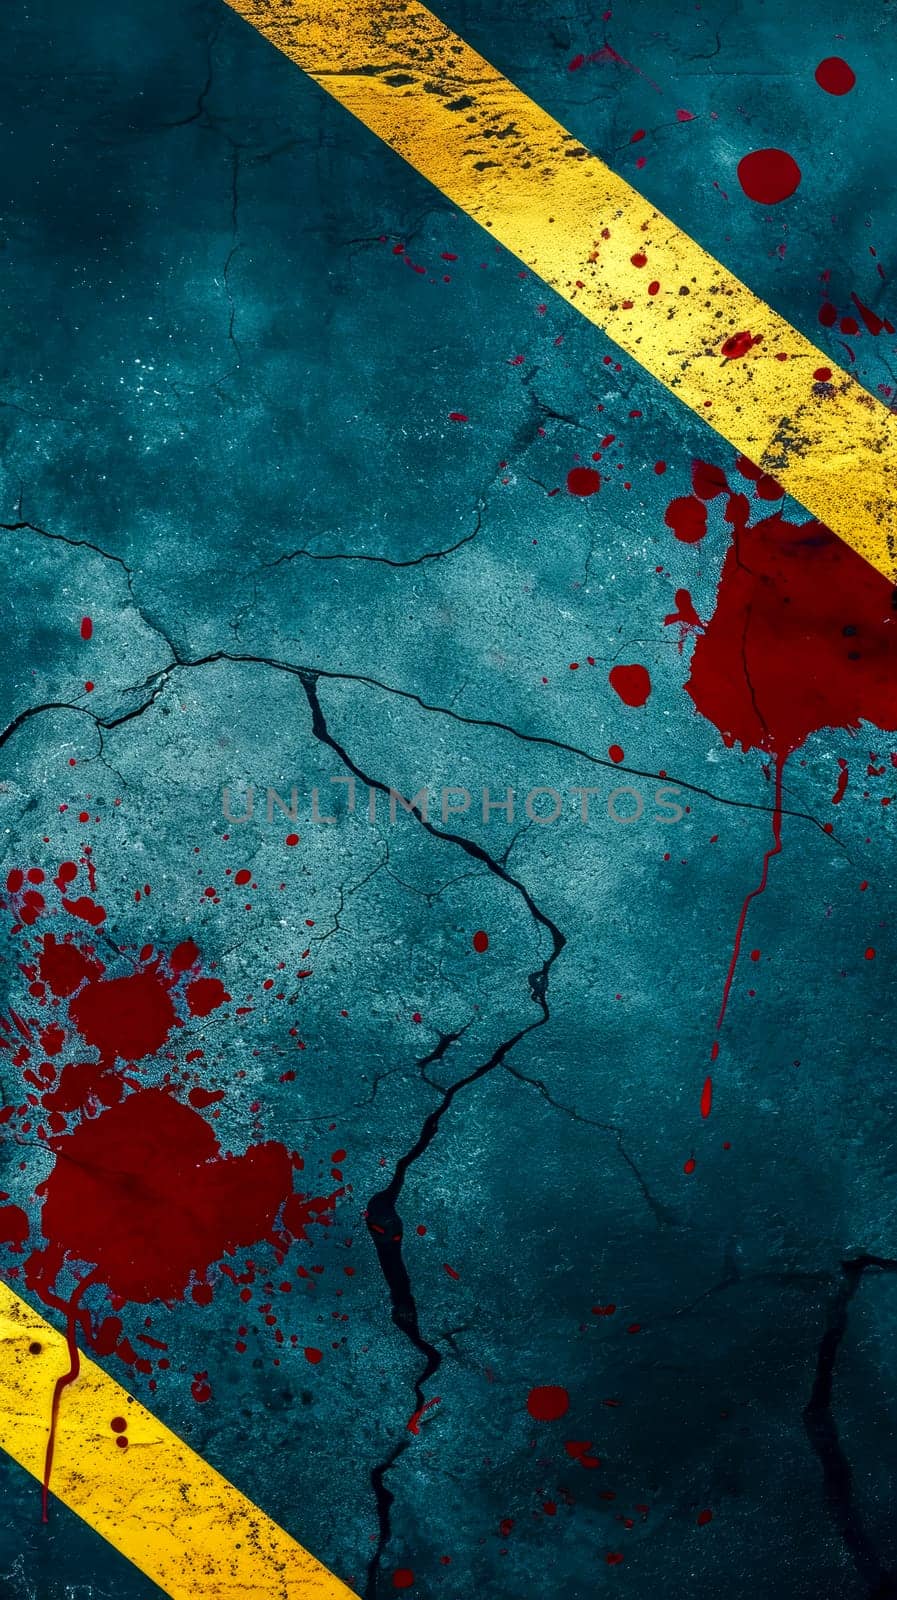 gritty, dark blue textured background with a diagonal yellow hazard stripe and splatters of red that could be interpreted as blood, crime scene or something ominous, with ample space for copy or text by Edophoto